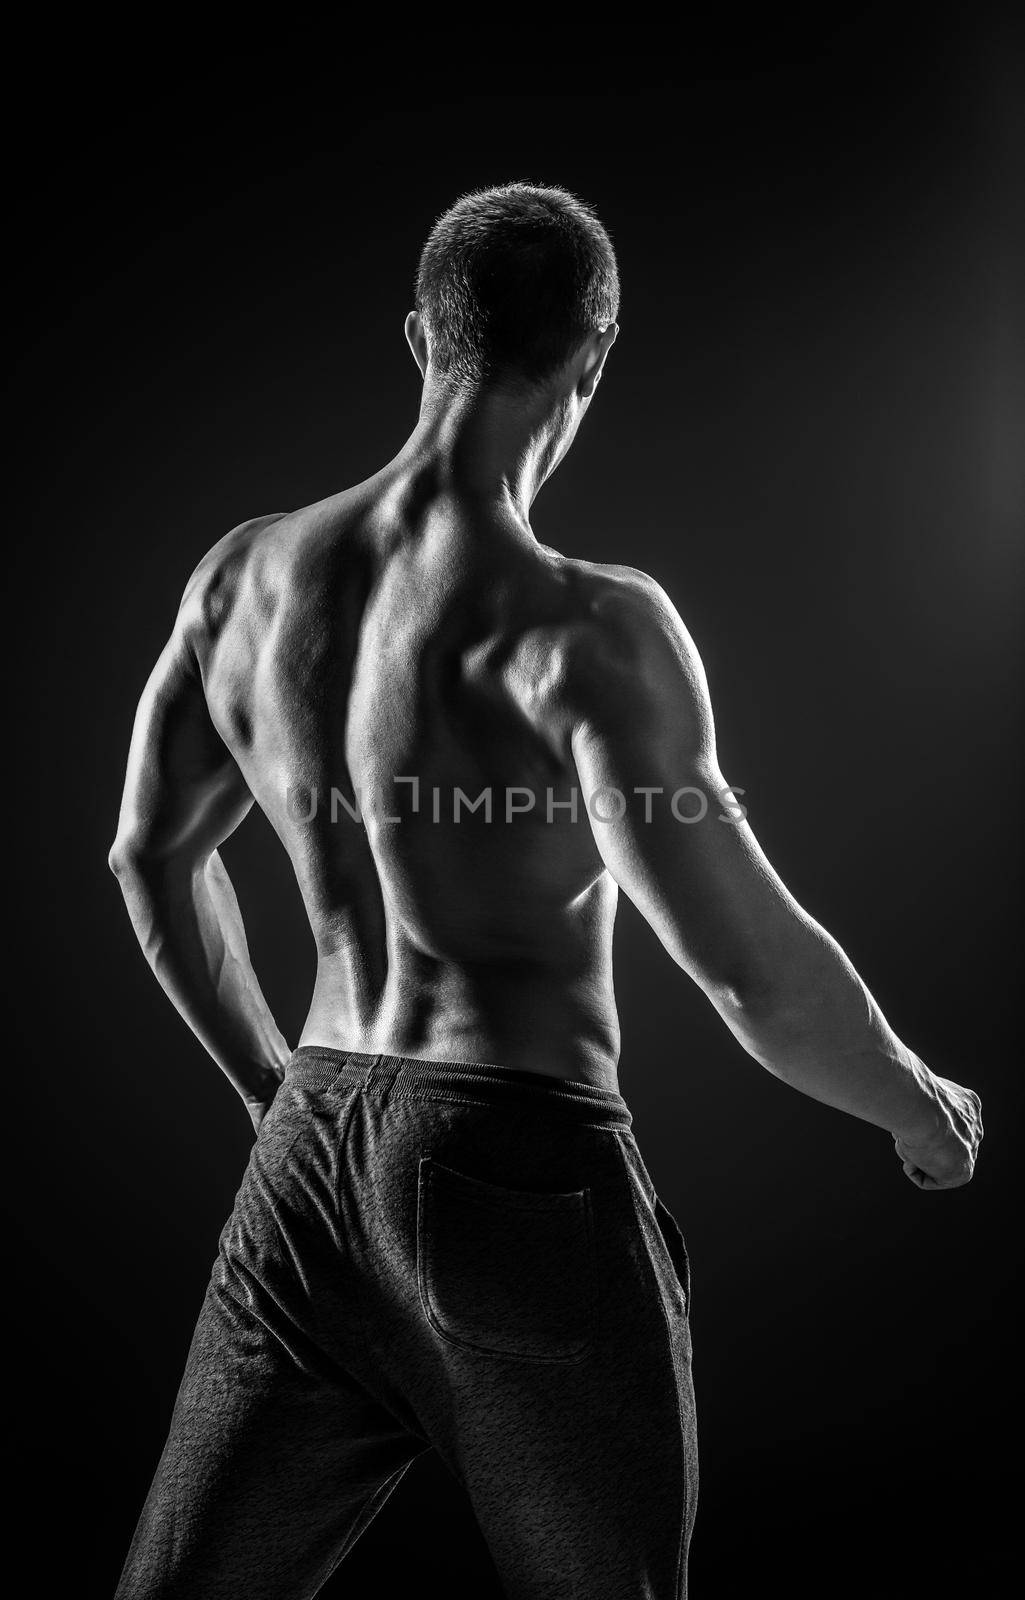 Stunning muscular man fitness model torso showing muscles back and shoulders on black background. Black and white